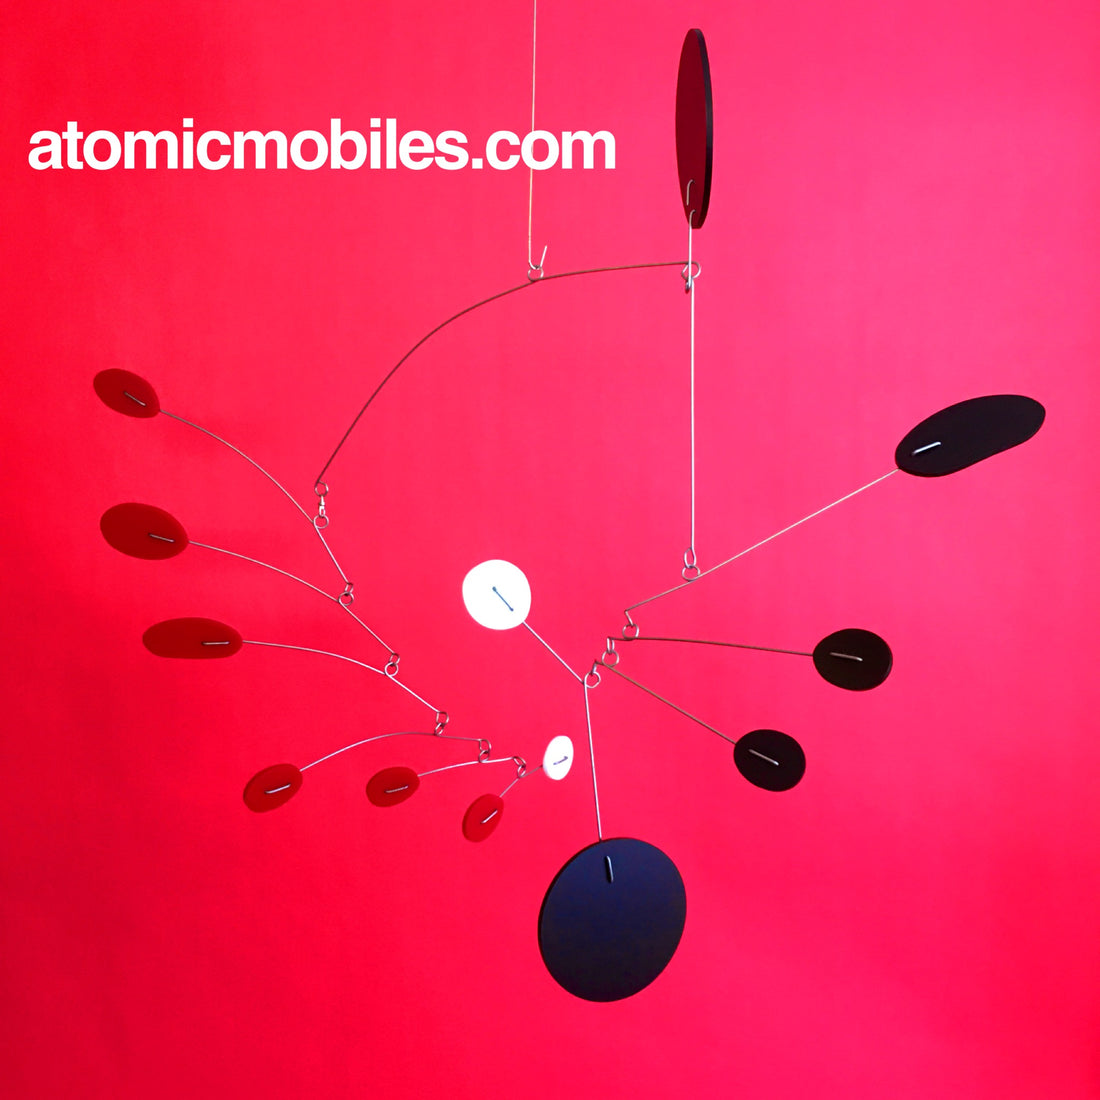 Papillon Mobile by AtomicMobiles.com